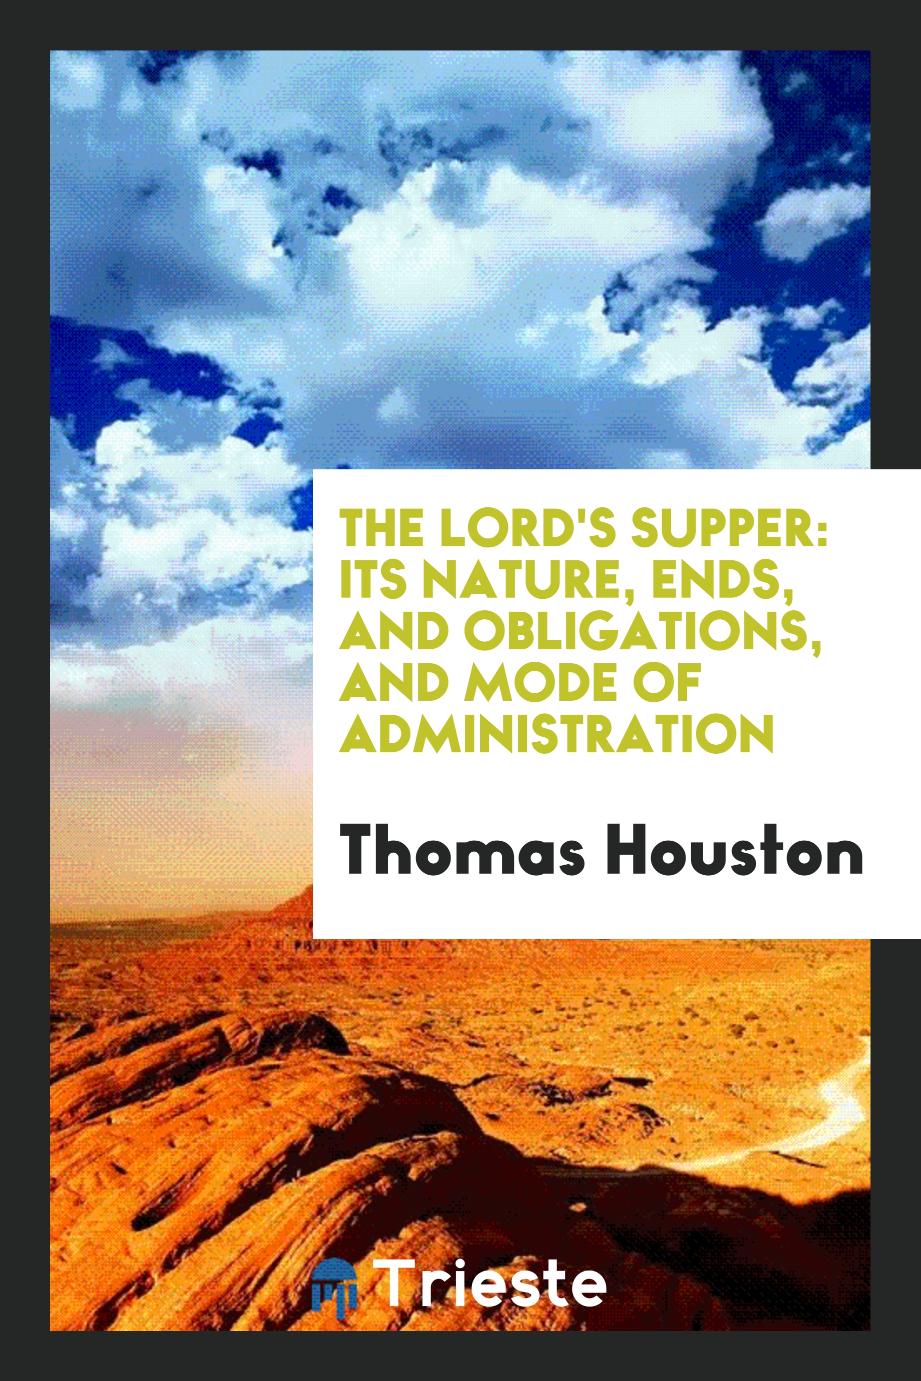 The Lord's Supper: Its Nature, Ends, and Obligations, and Mode of Administration